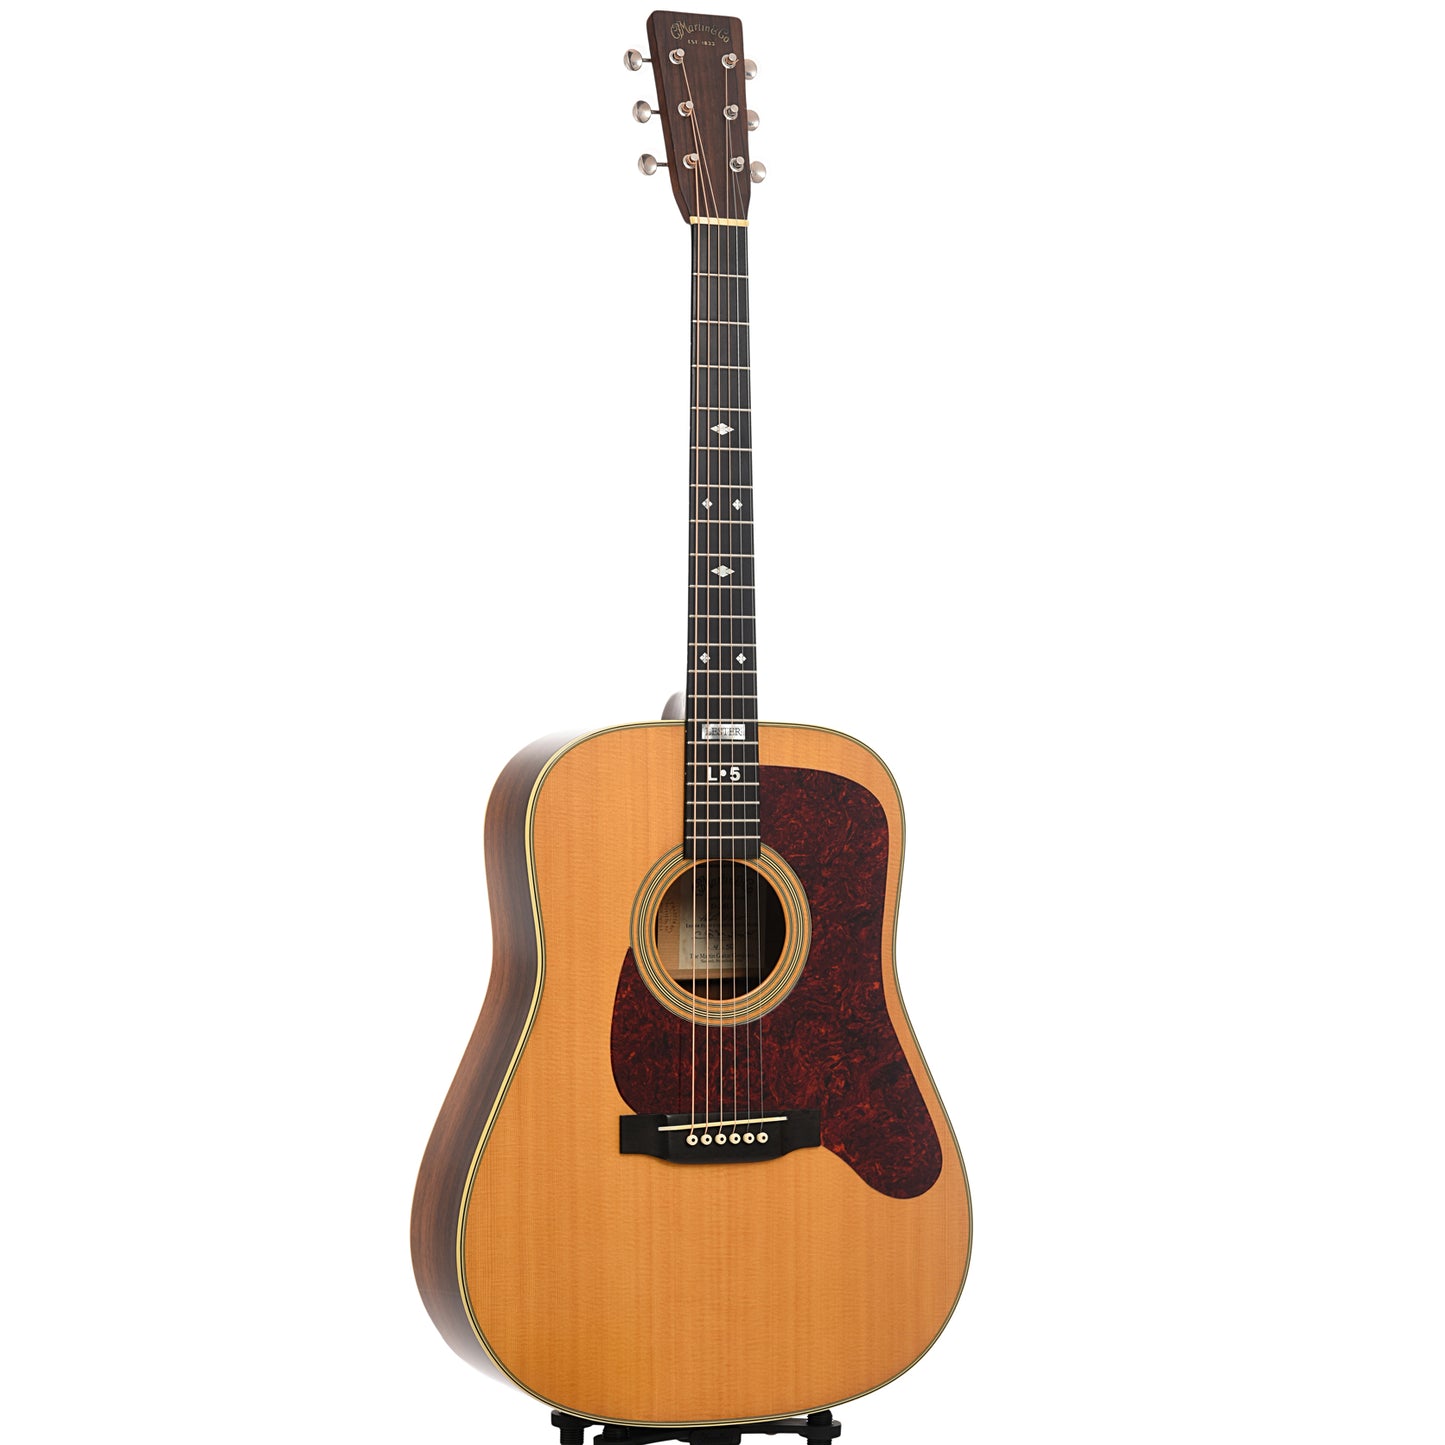 Full front and side of Martin D-28LF Lester Flatt Commemorative Edition Acoustic Guitar